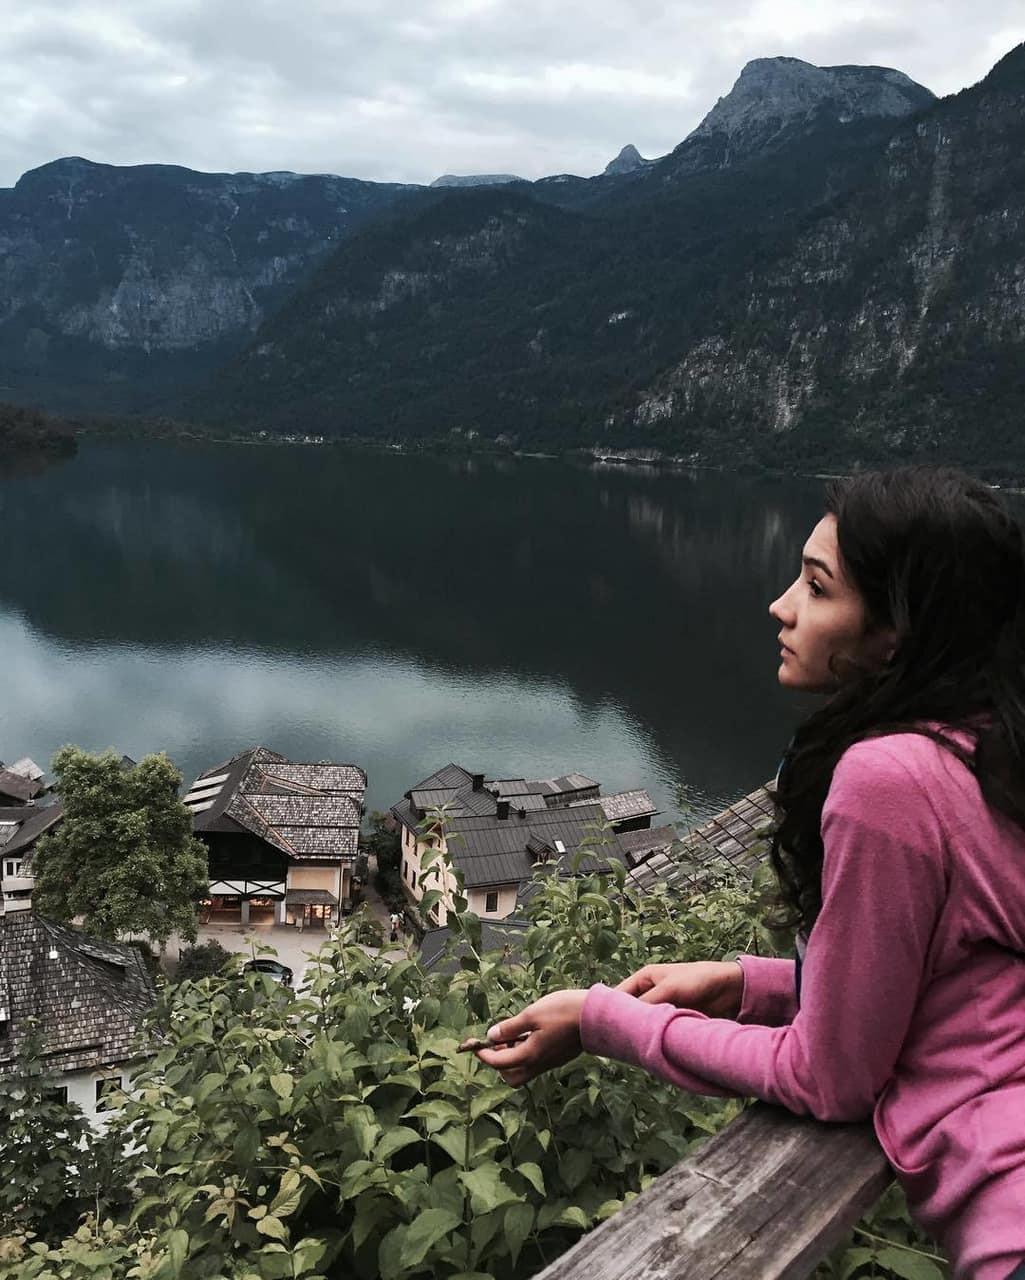 image about Aybüke Pusat. See more about aybuke